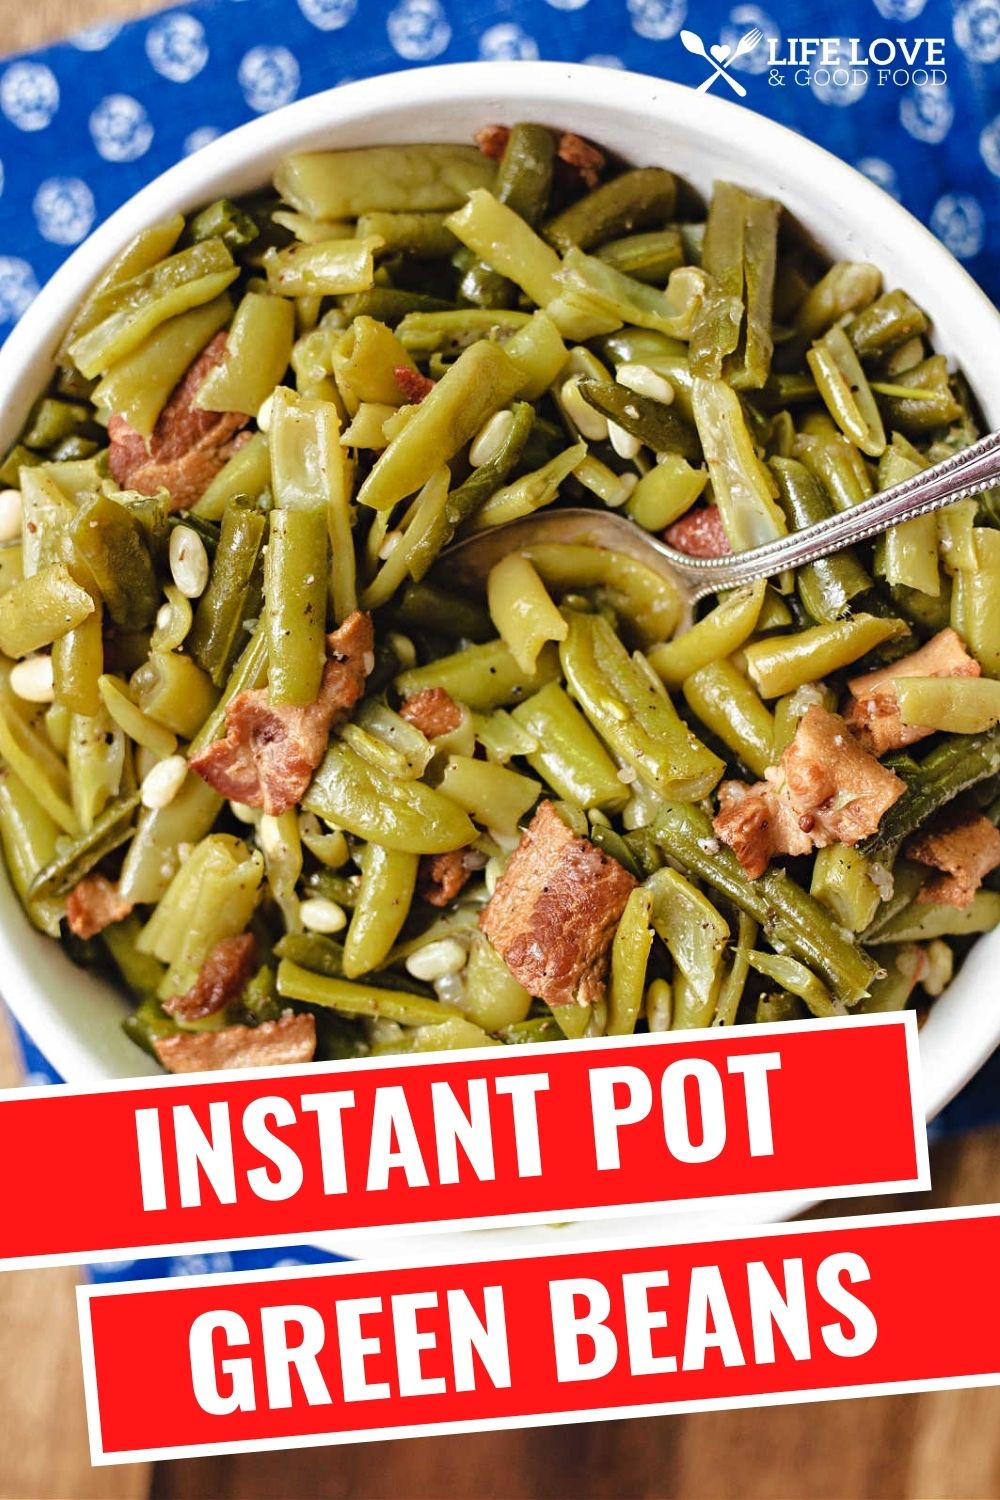 Instant Pot Green Beans - Life, Love, and Good Food